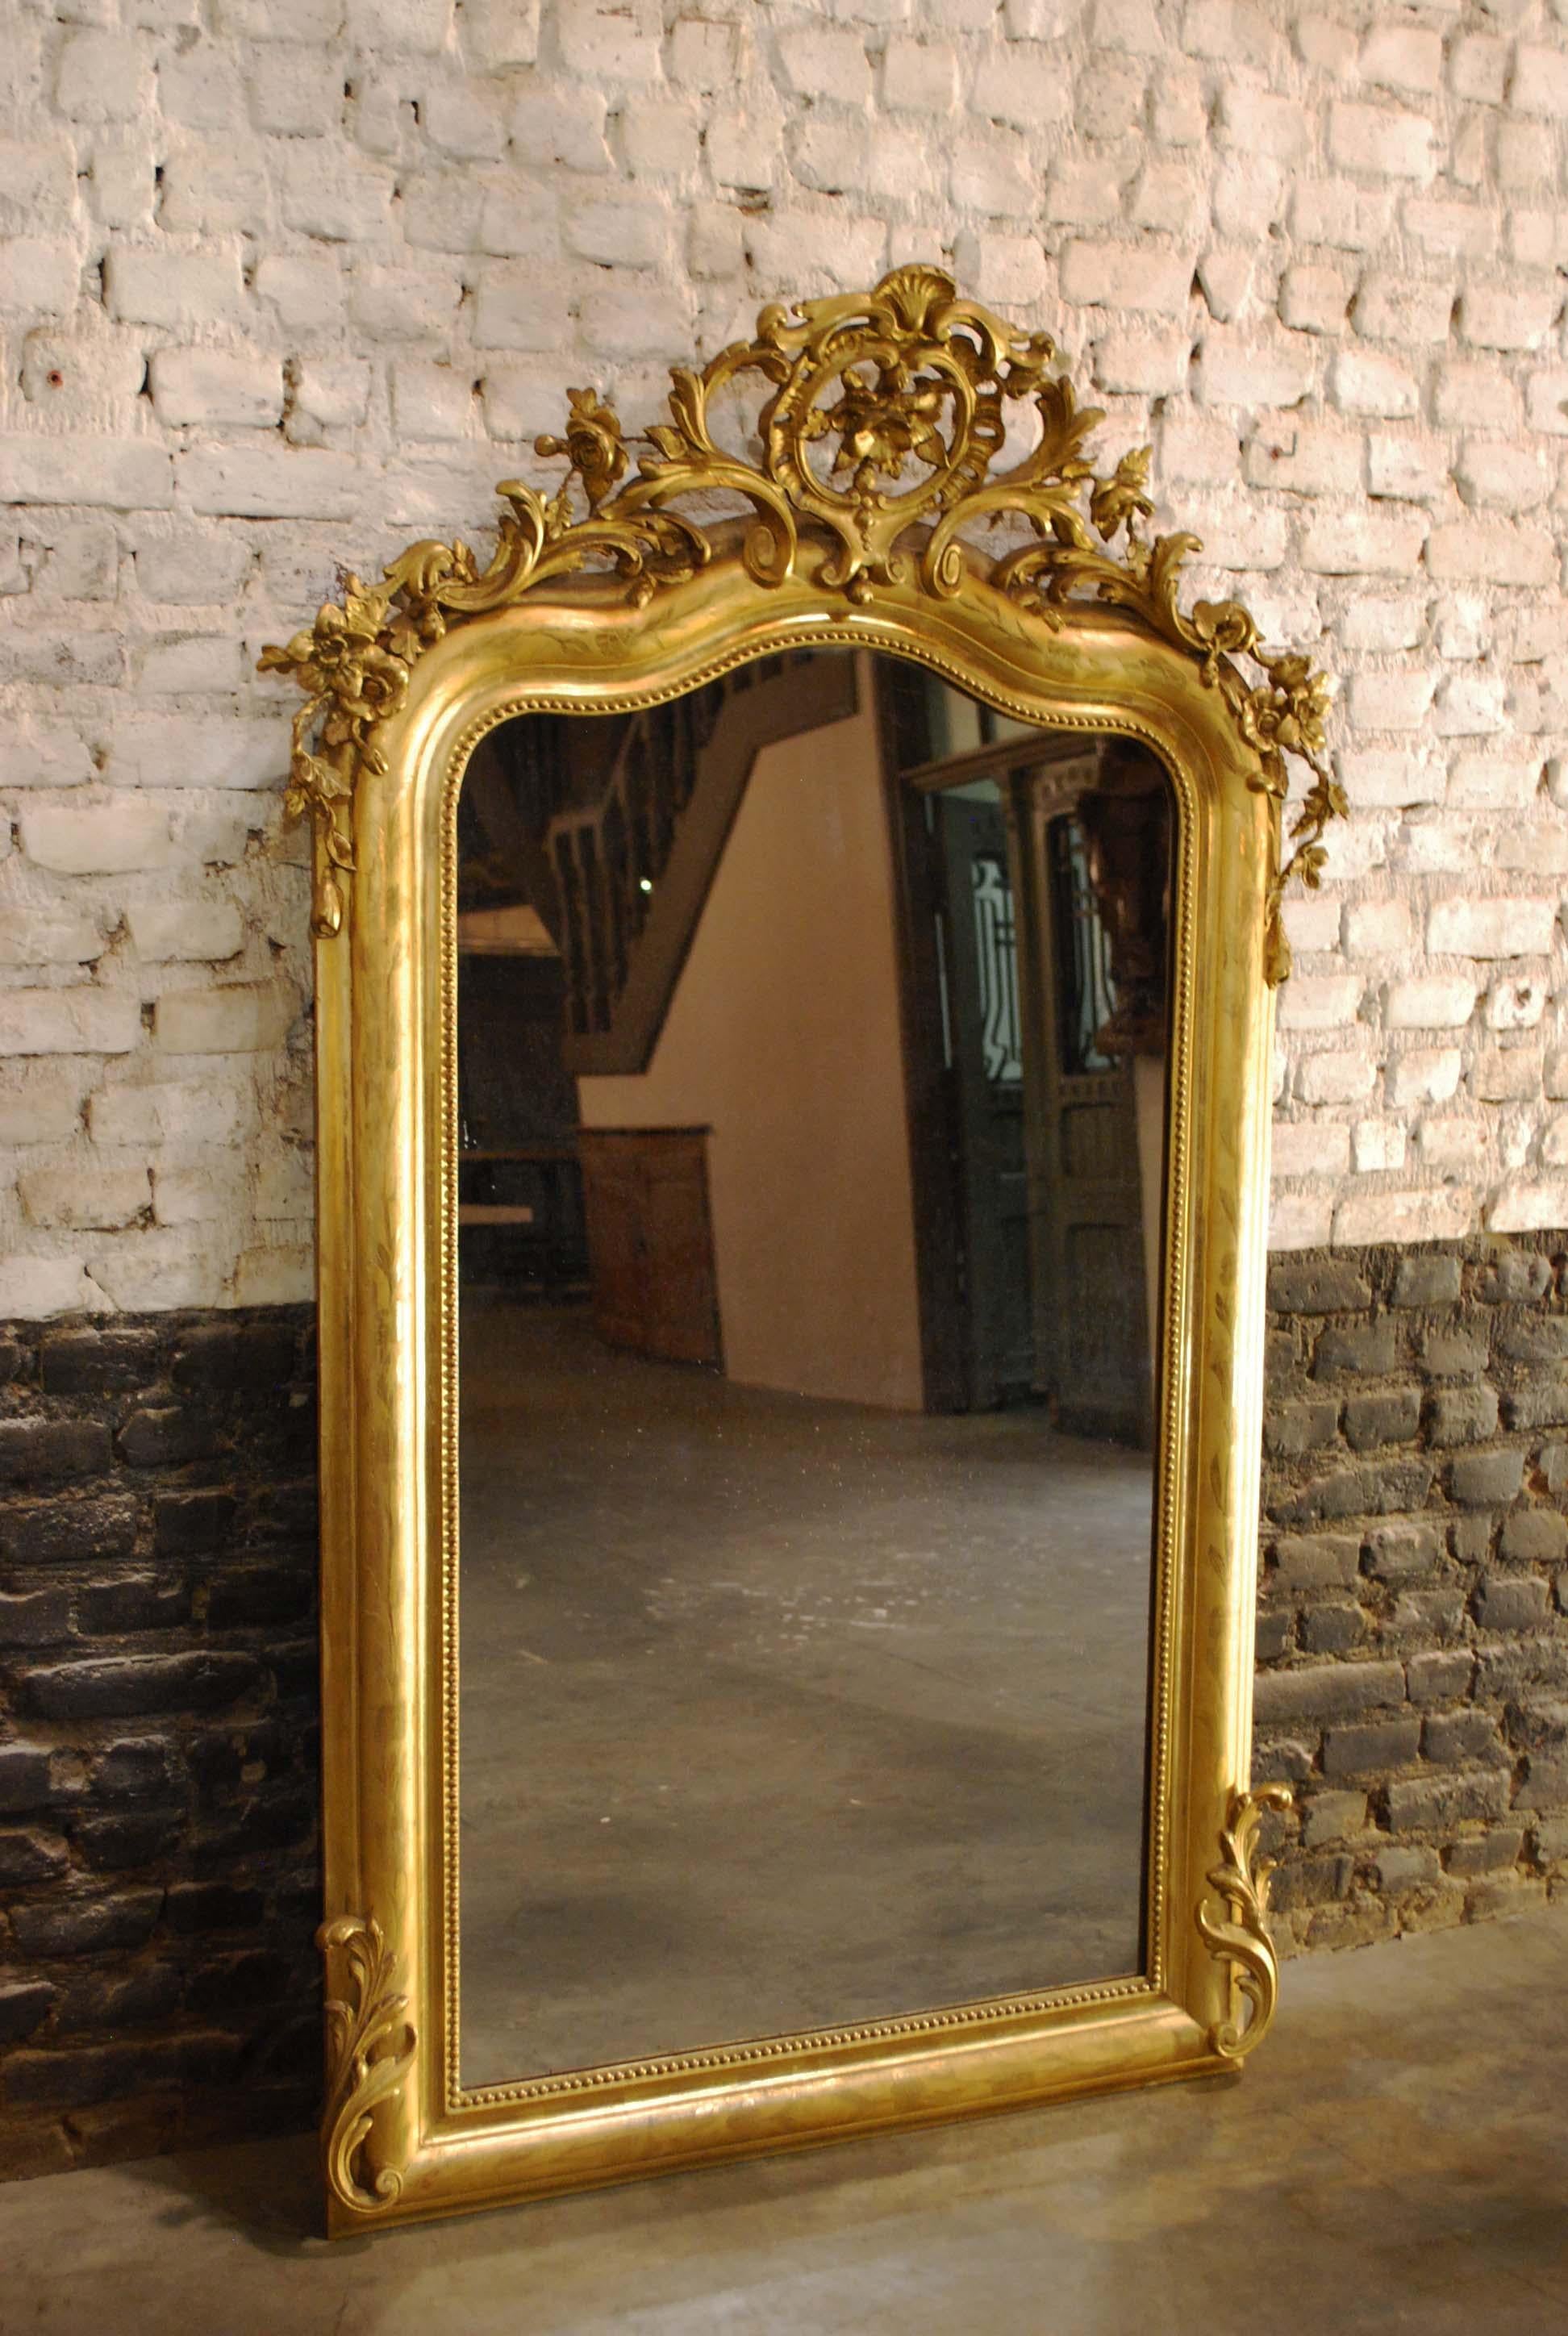 This beautiful antique Louis Philippe mirror was made in Southern France and dates approximately 1850. 
The frame is completely gold leaf gilt and is adorned with wonderful ornaments. The sculpted cartouche or crest on top is centered upon two c